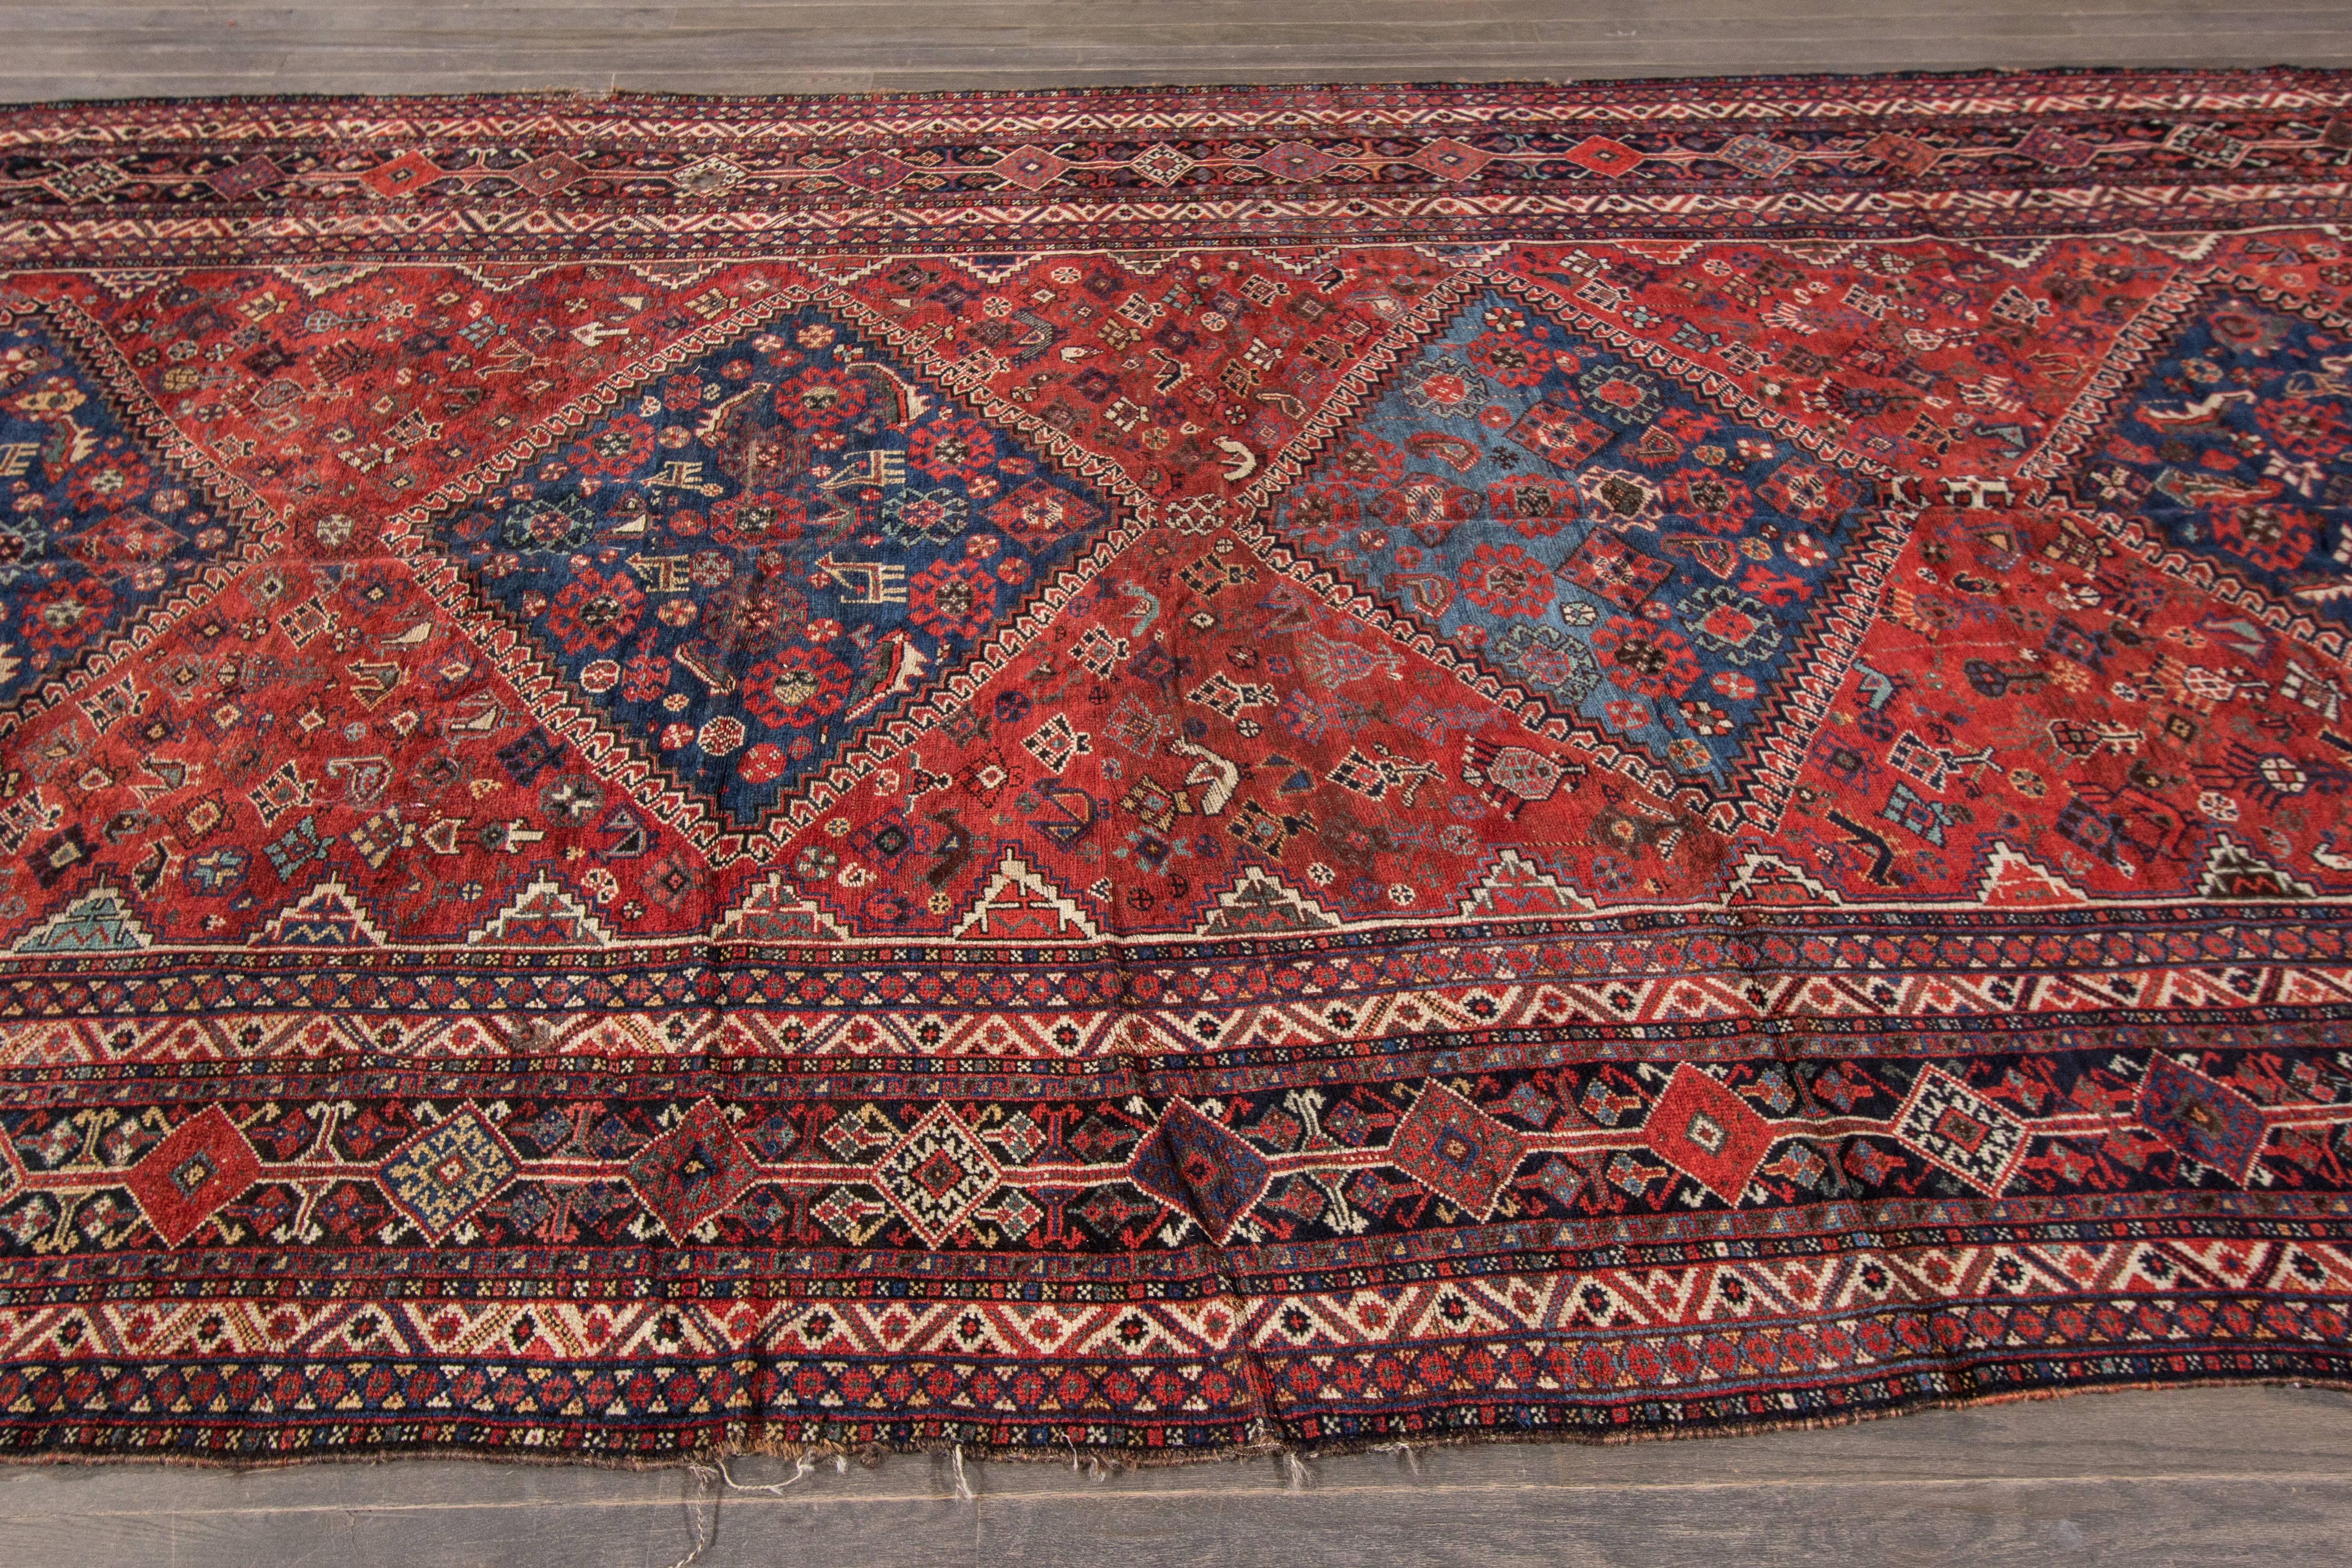 A hand-knotted antique Shiraz rug with a geometric floral pattern on a red field. Accents of ivory, blue and beige throughout the piece. The size of this piece is 6'.11 x 15'.7.